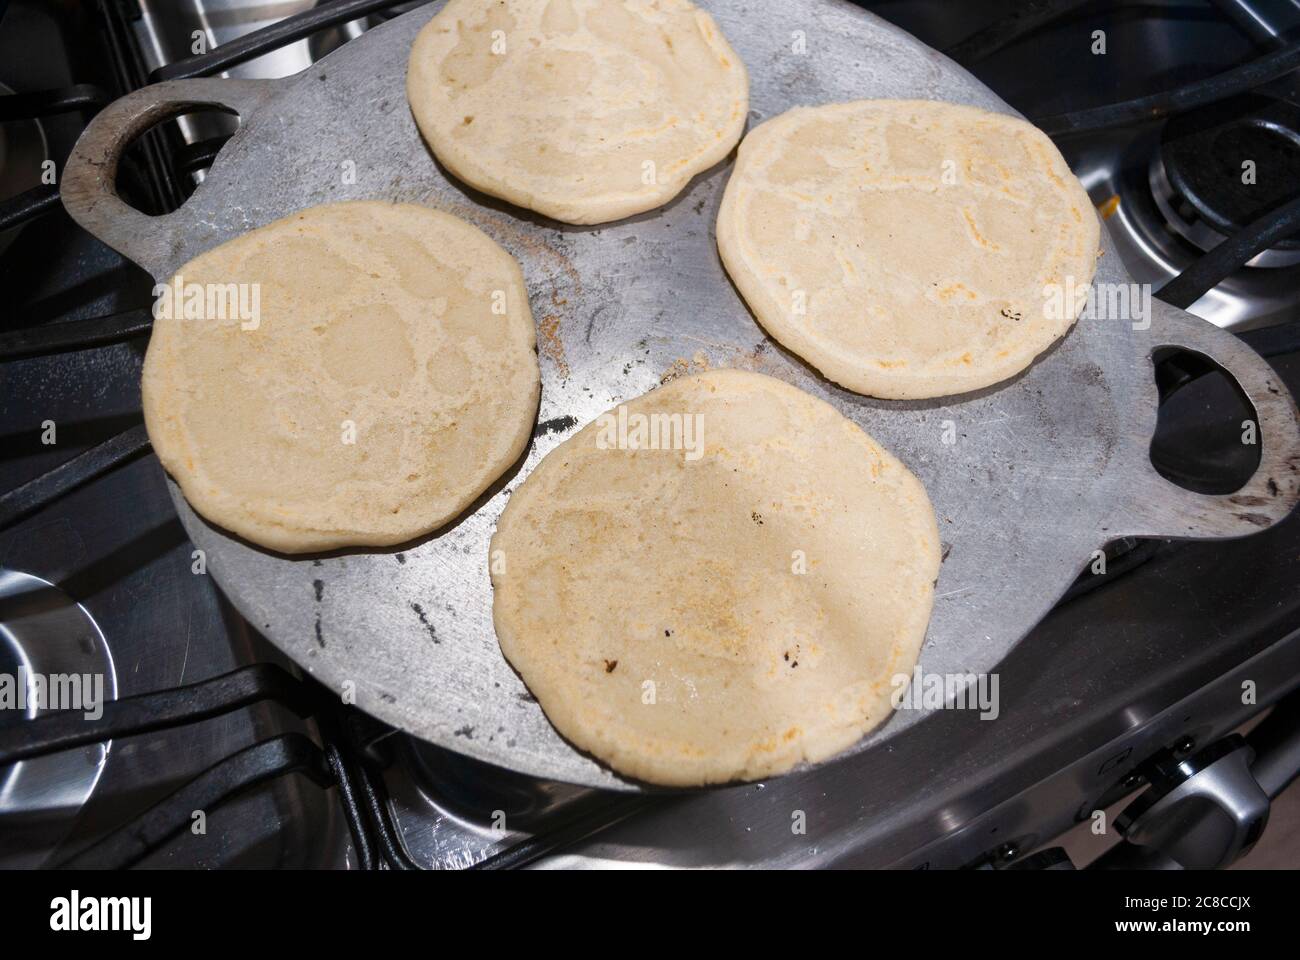 https://c8.alamy.com/comp/2C8CCJX/nutritious-handmade-corn-tortilla-cooked-on-a-metal-griddle-on-a-gas-stove-in-a-guatemalan-home-2C8CCJX.jpg